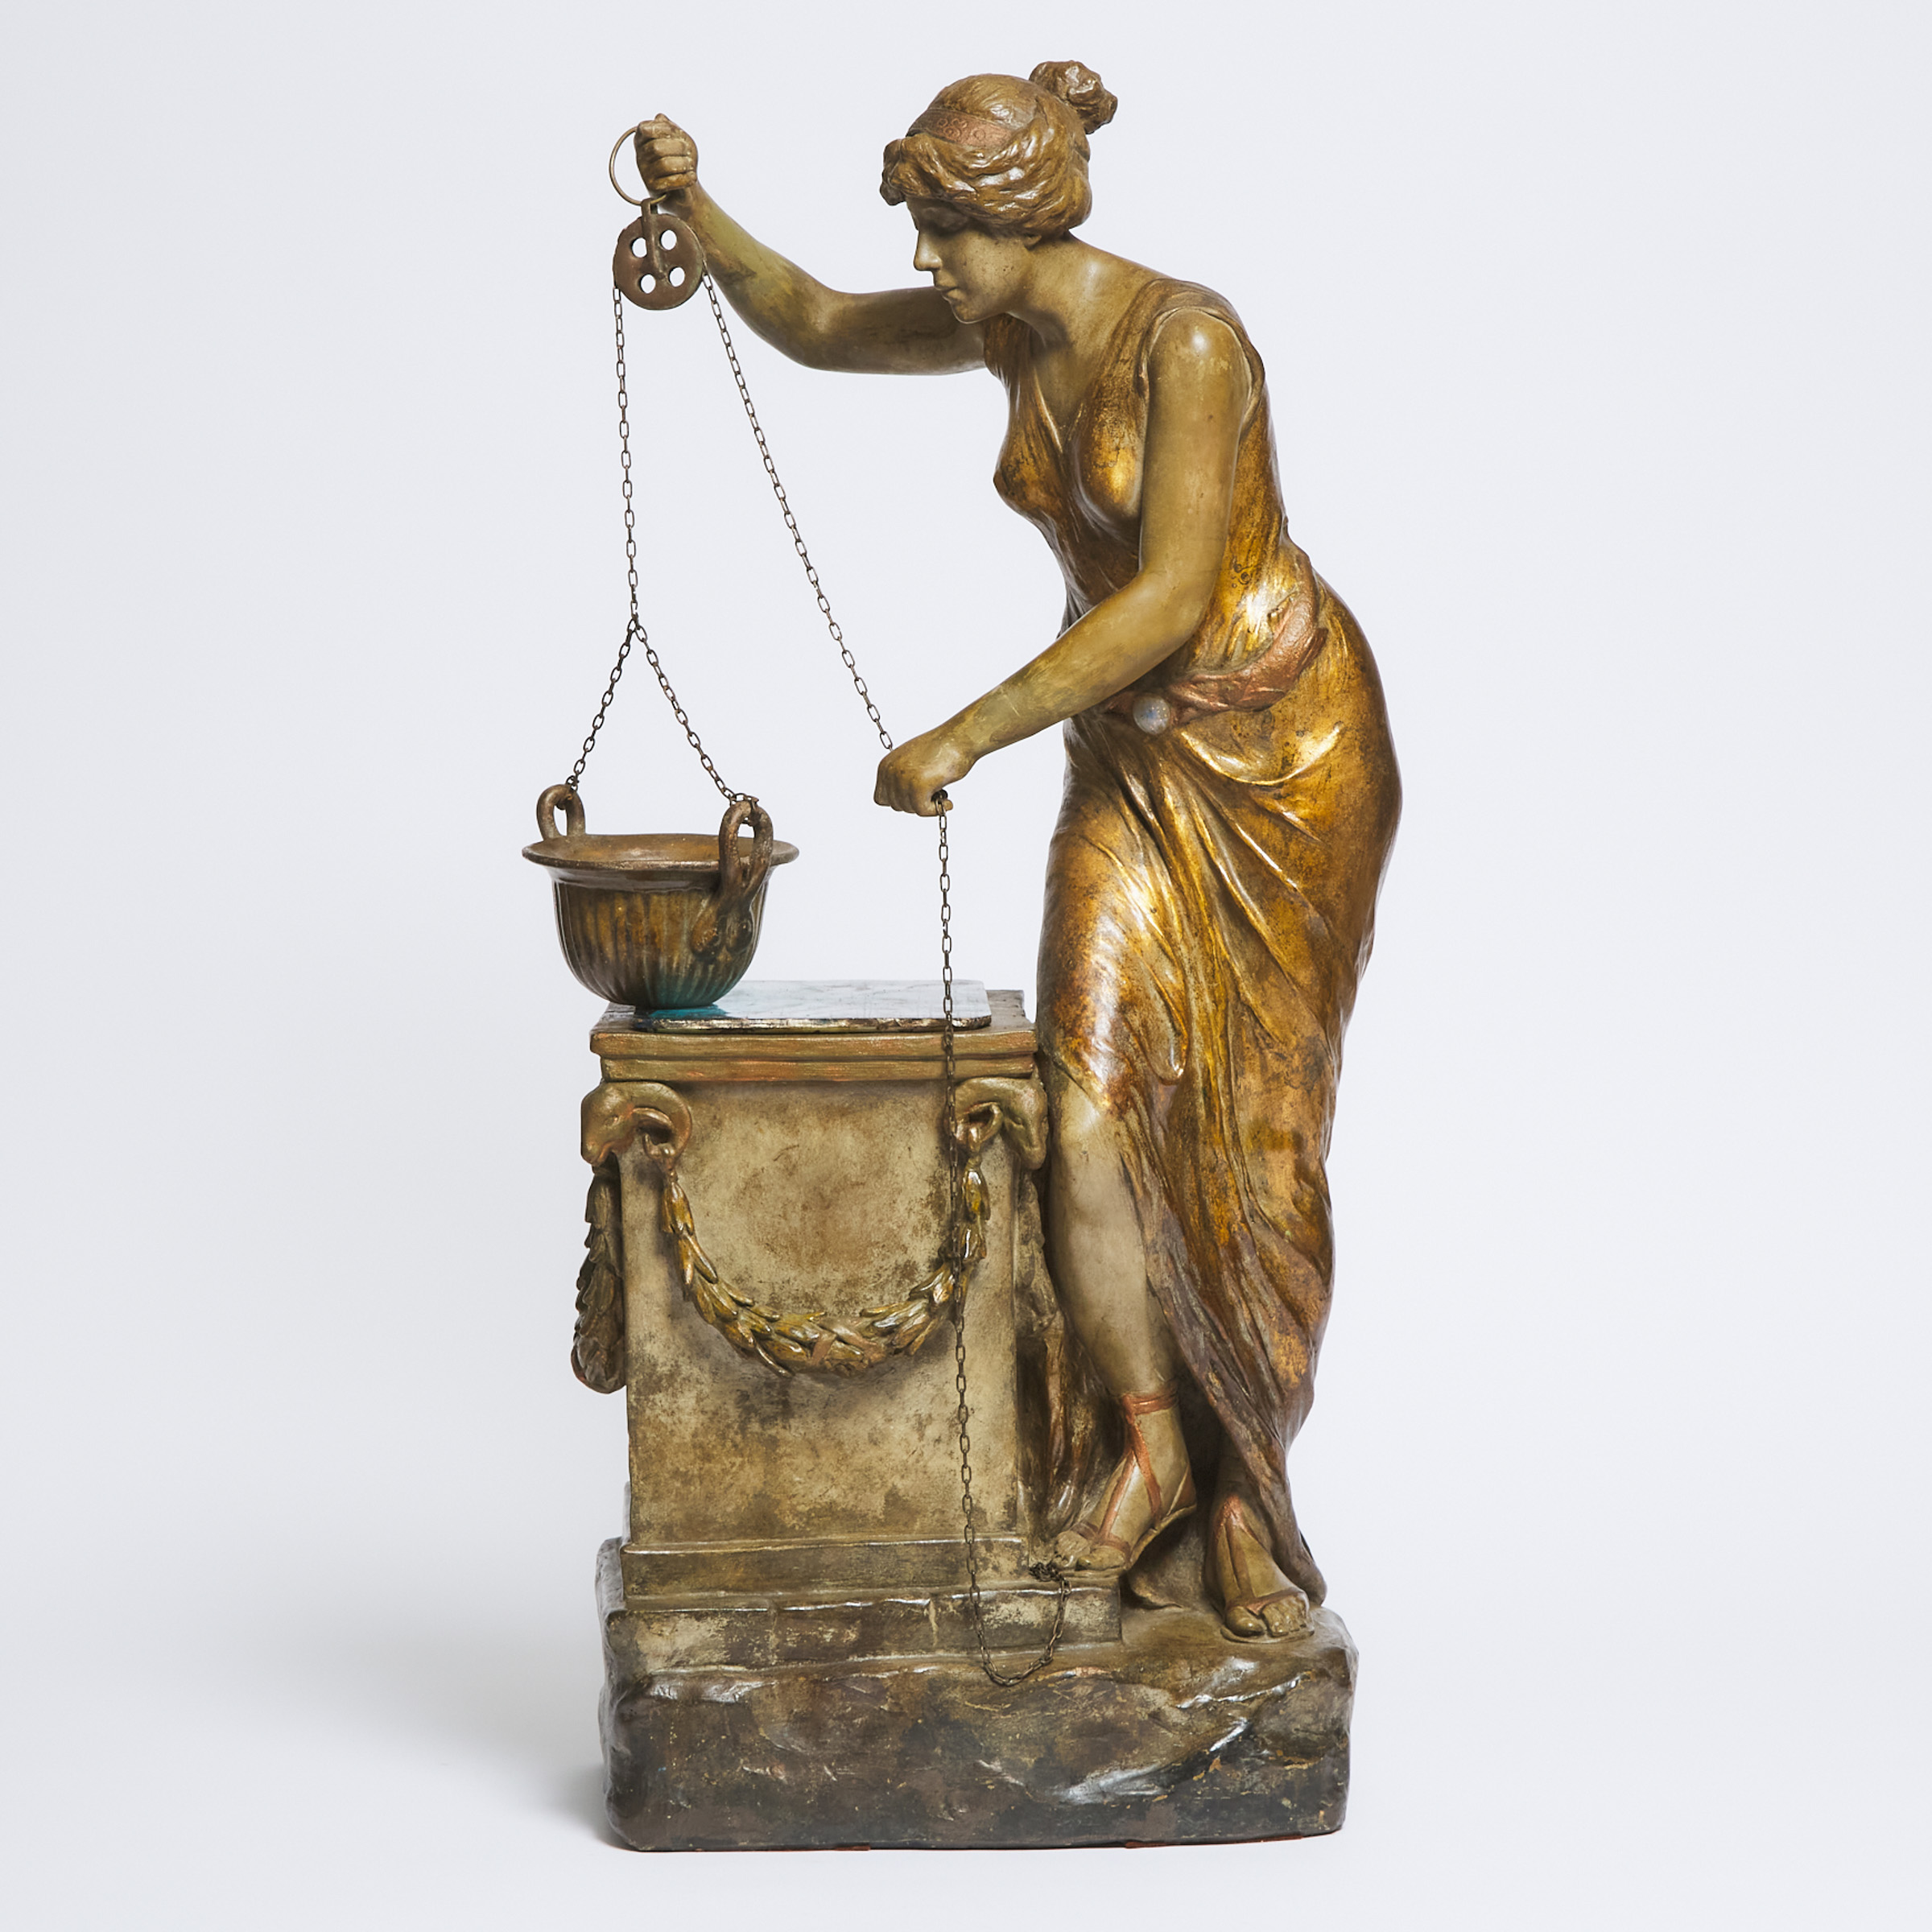 Large Austrian Patinated Terracotta Illuminated Model of a Young Woman Drawing Water from a Neoclassical Well, Goldschieder, Vienna, early 20th century